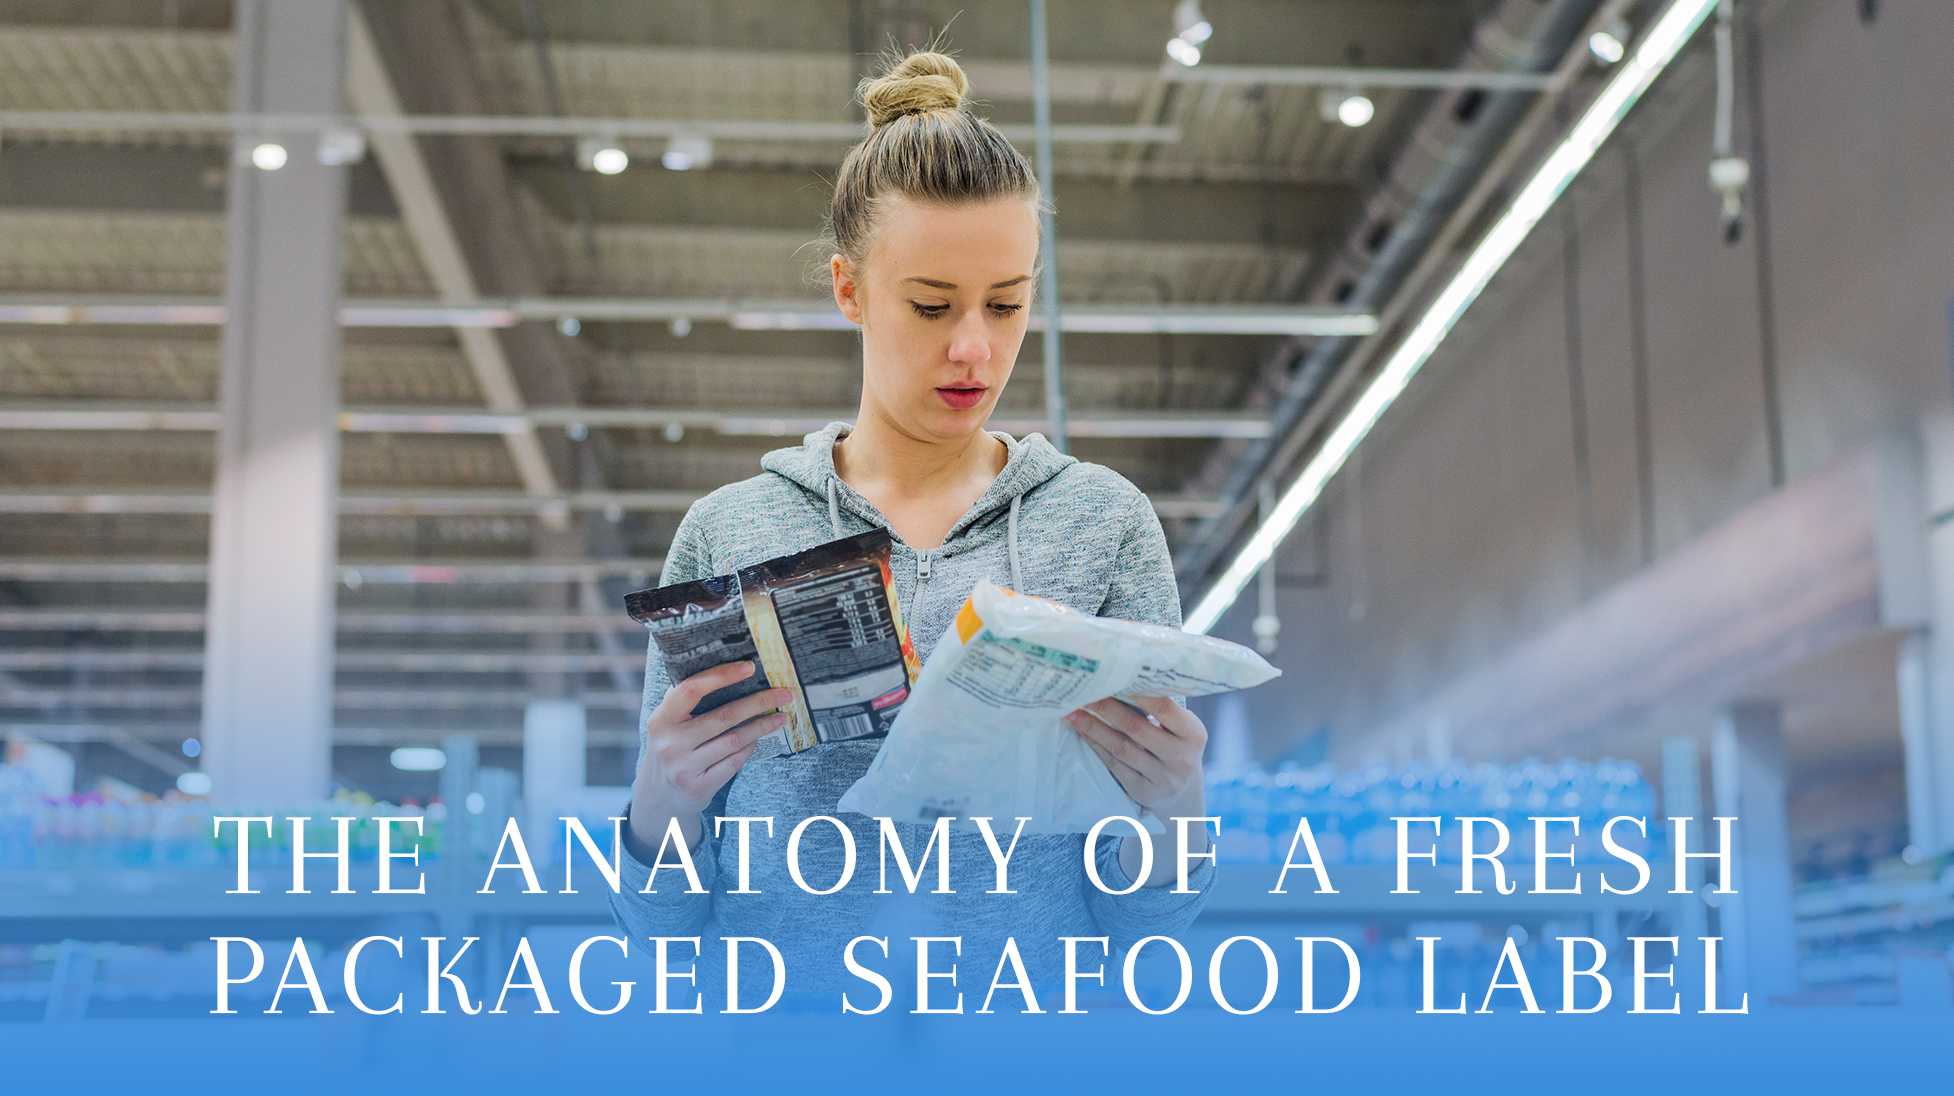 The Anatomy of a Fresh Packaged Seafood Label